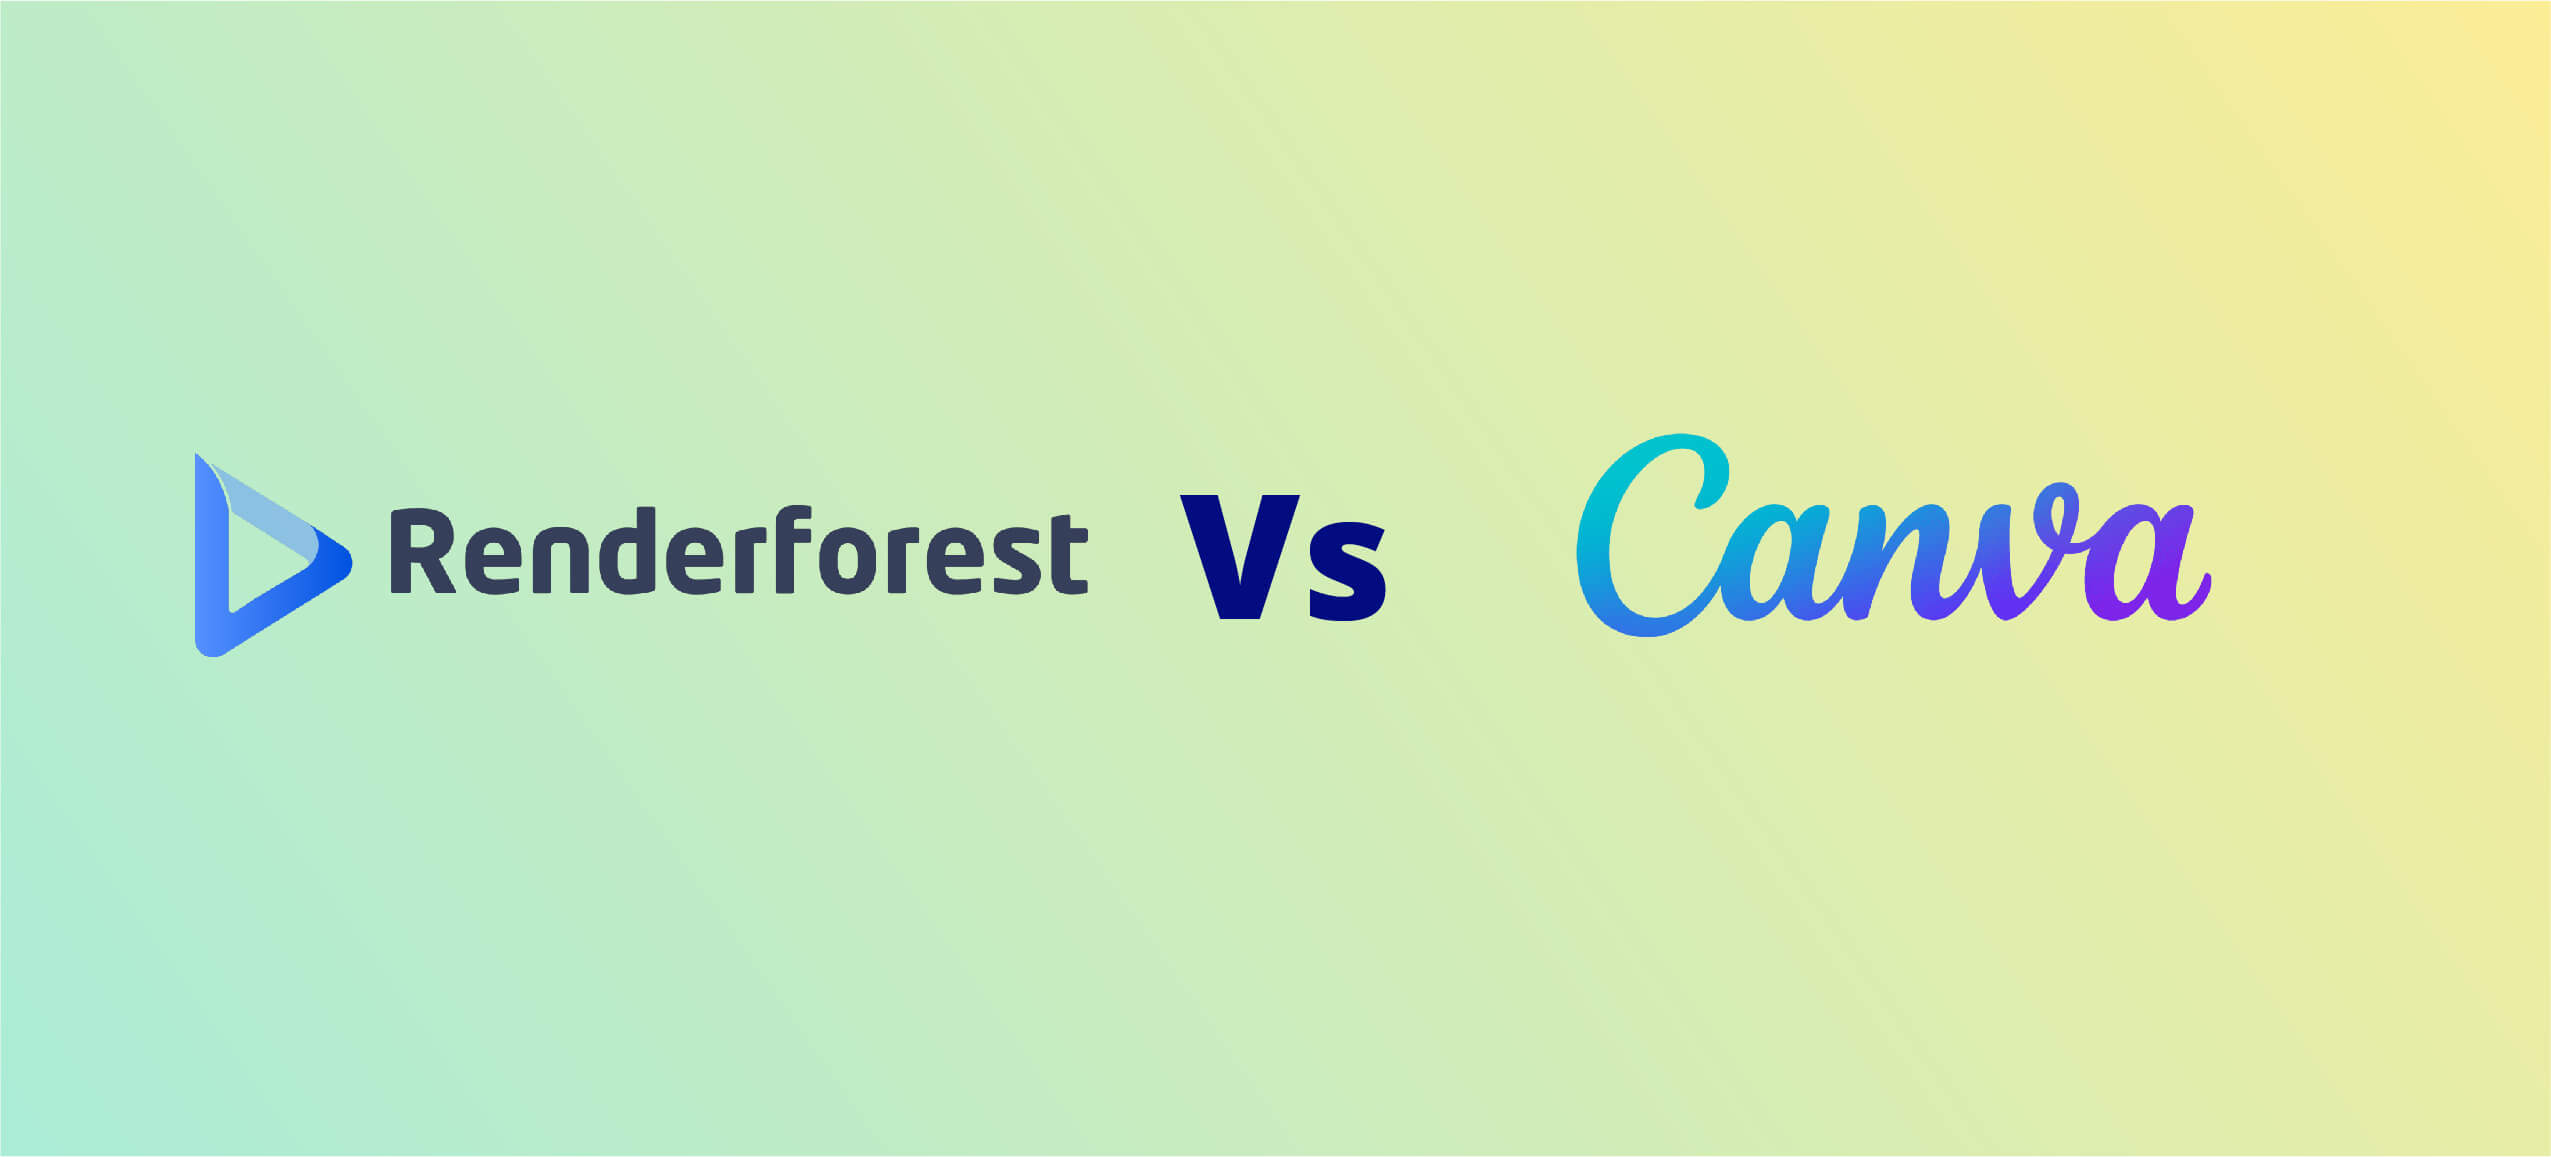 Renderforest vs Canva - Feature Image